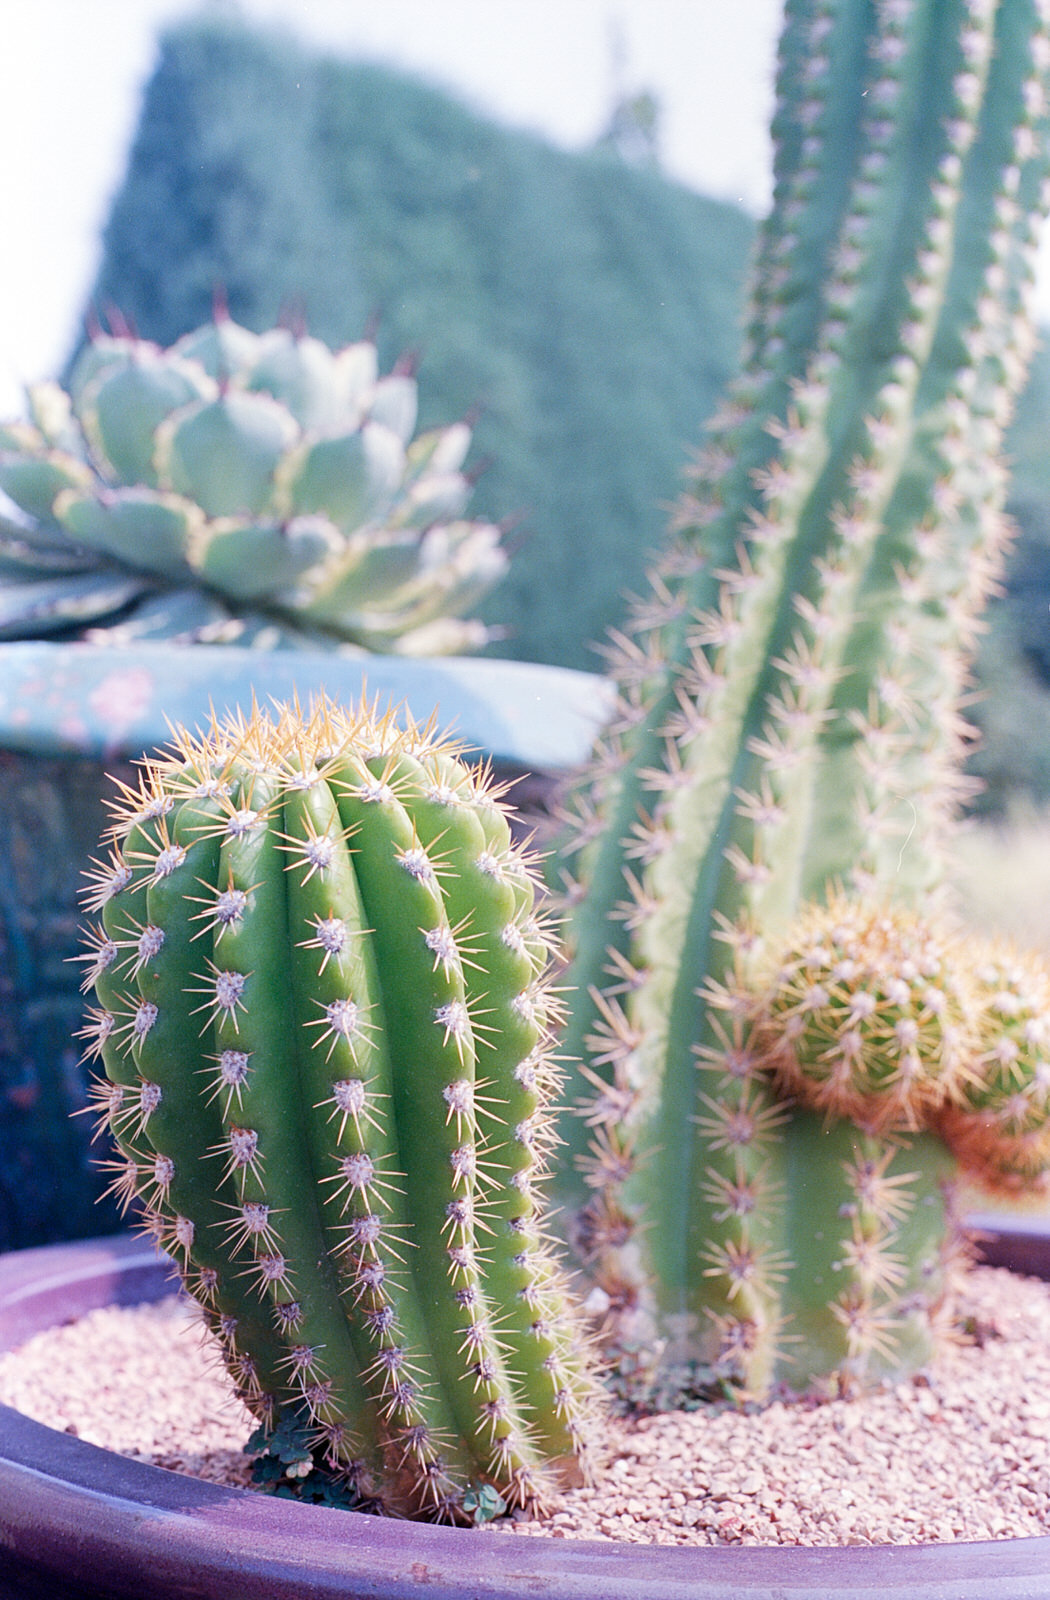 I can never pass up a pretty cactus to shoot!  